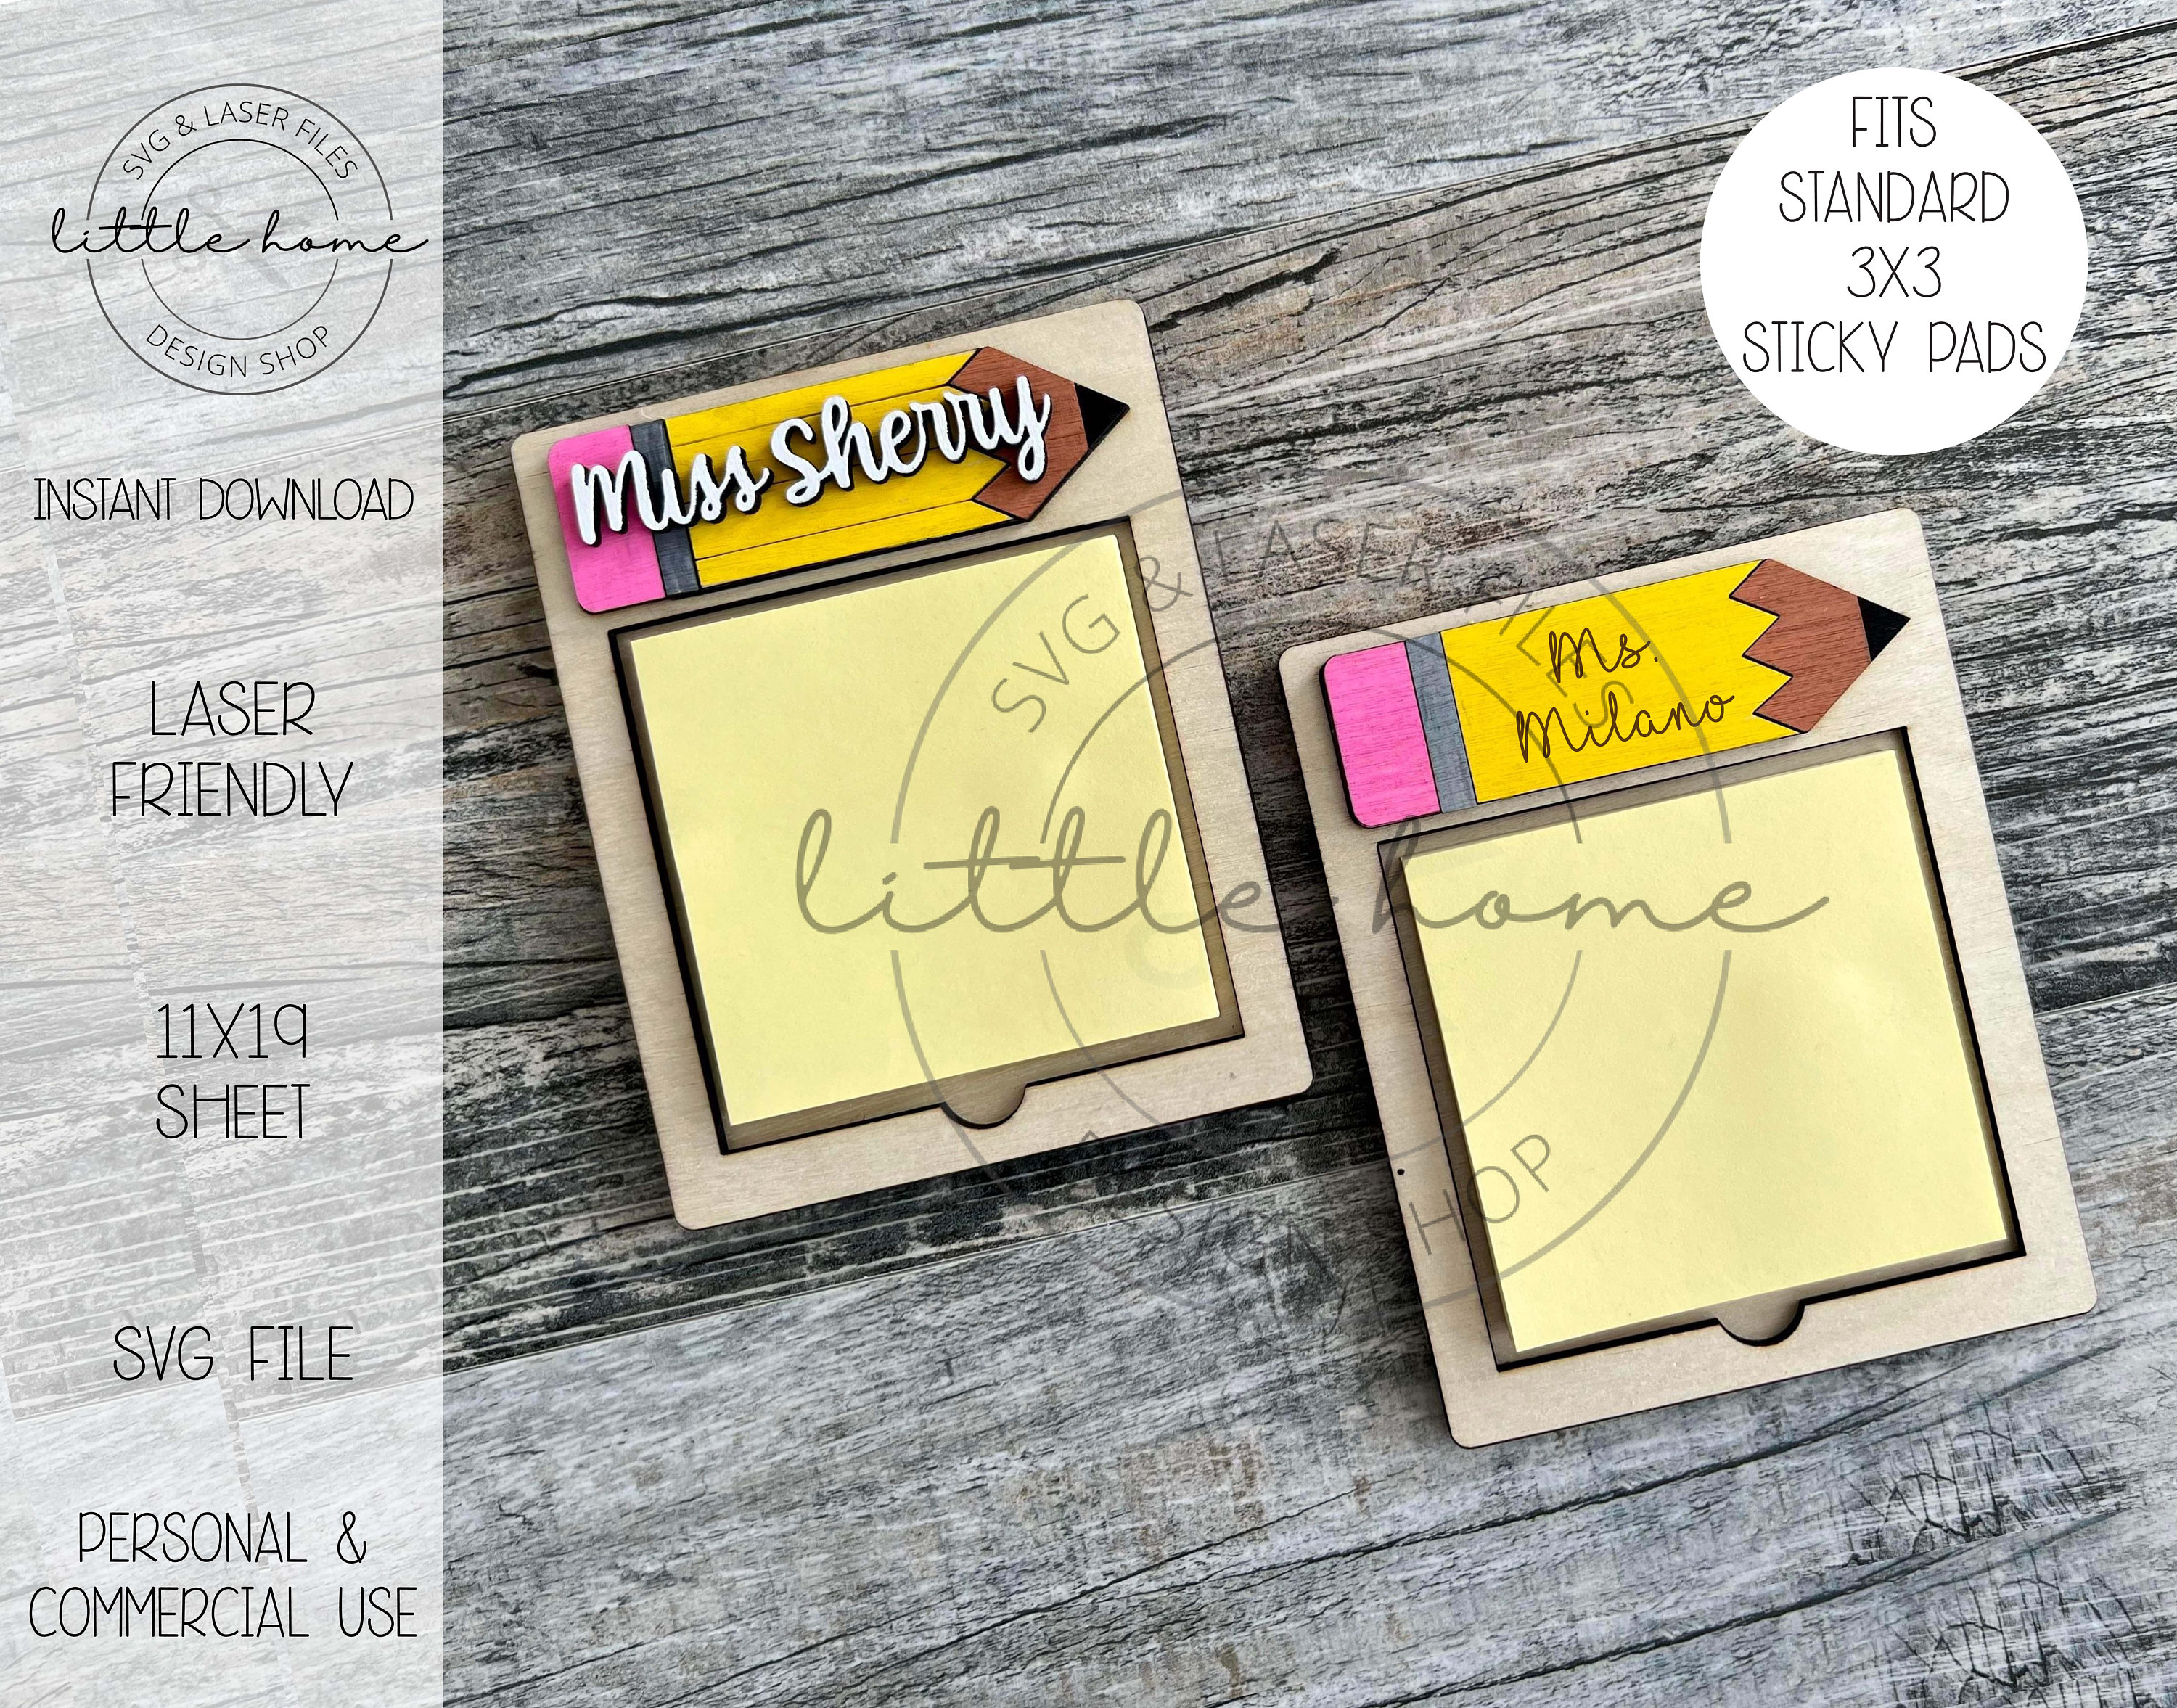 Square Sticky Notes / Neon Post It Notes / Memo Pads of 100 Pages Each  76x76mm / Great for Studying, Reminders & to Do Lists 